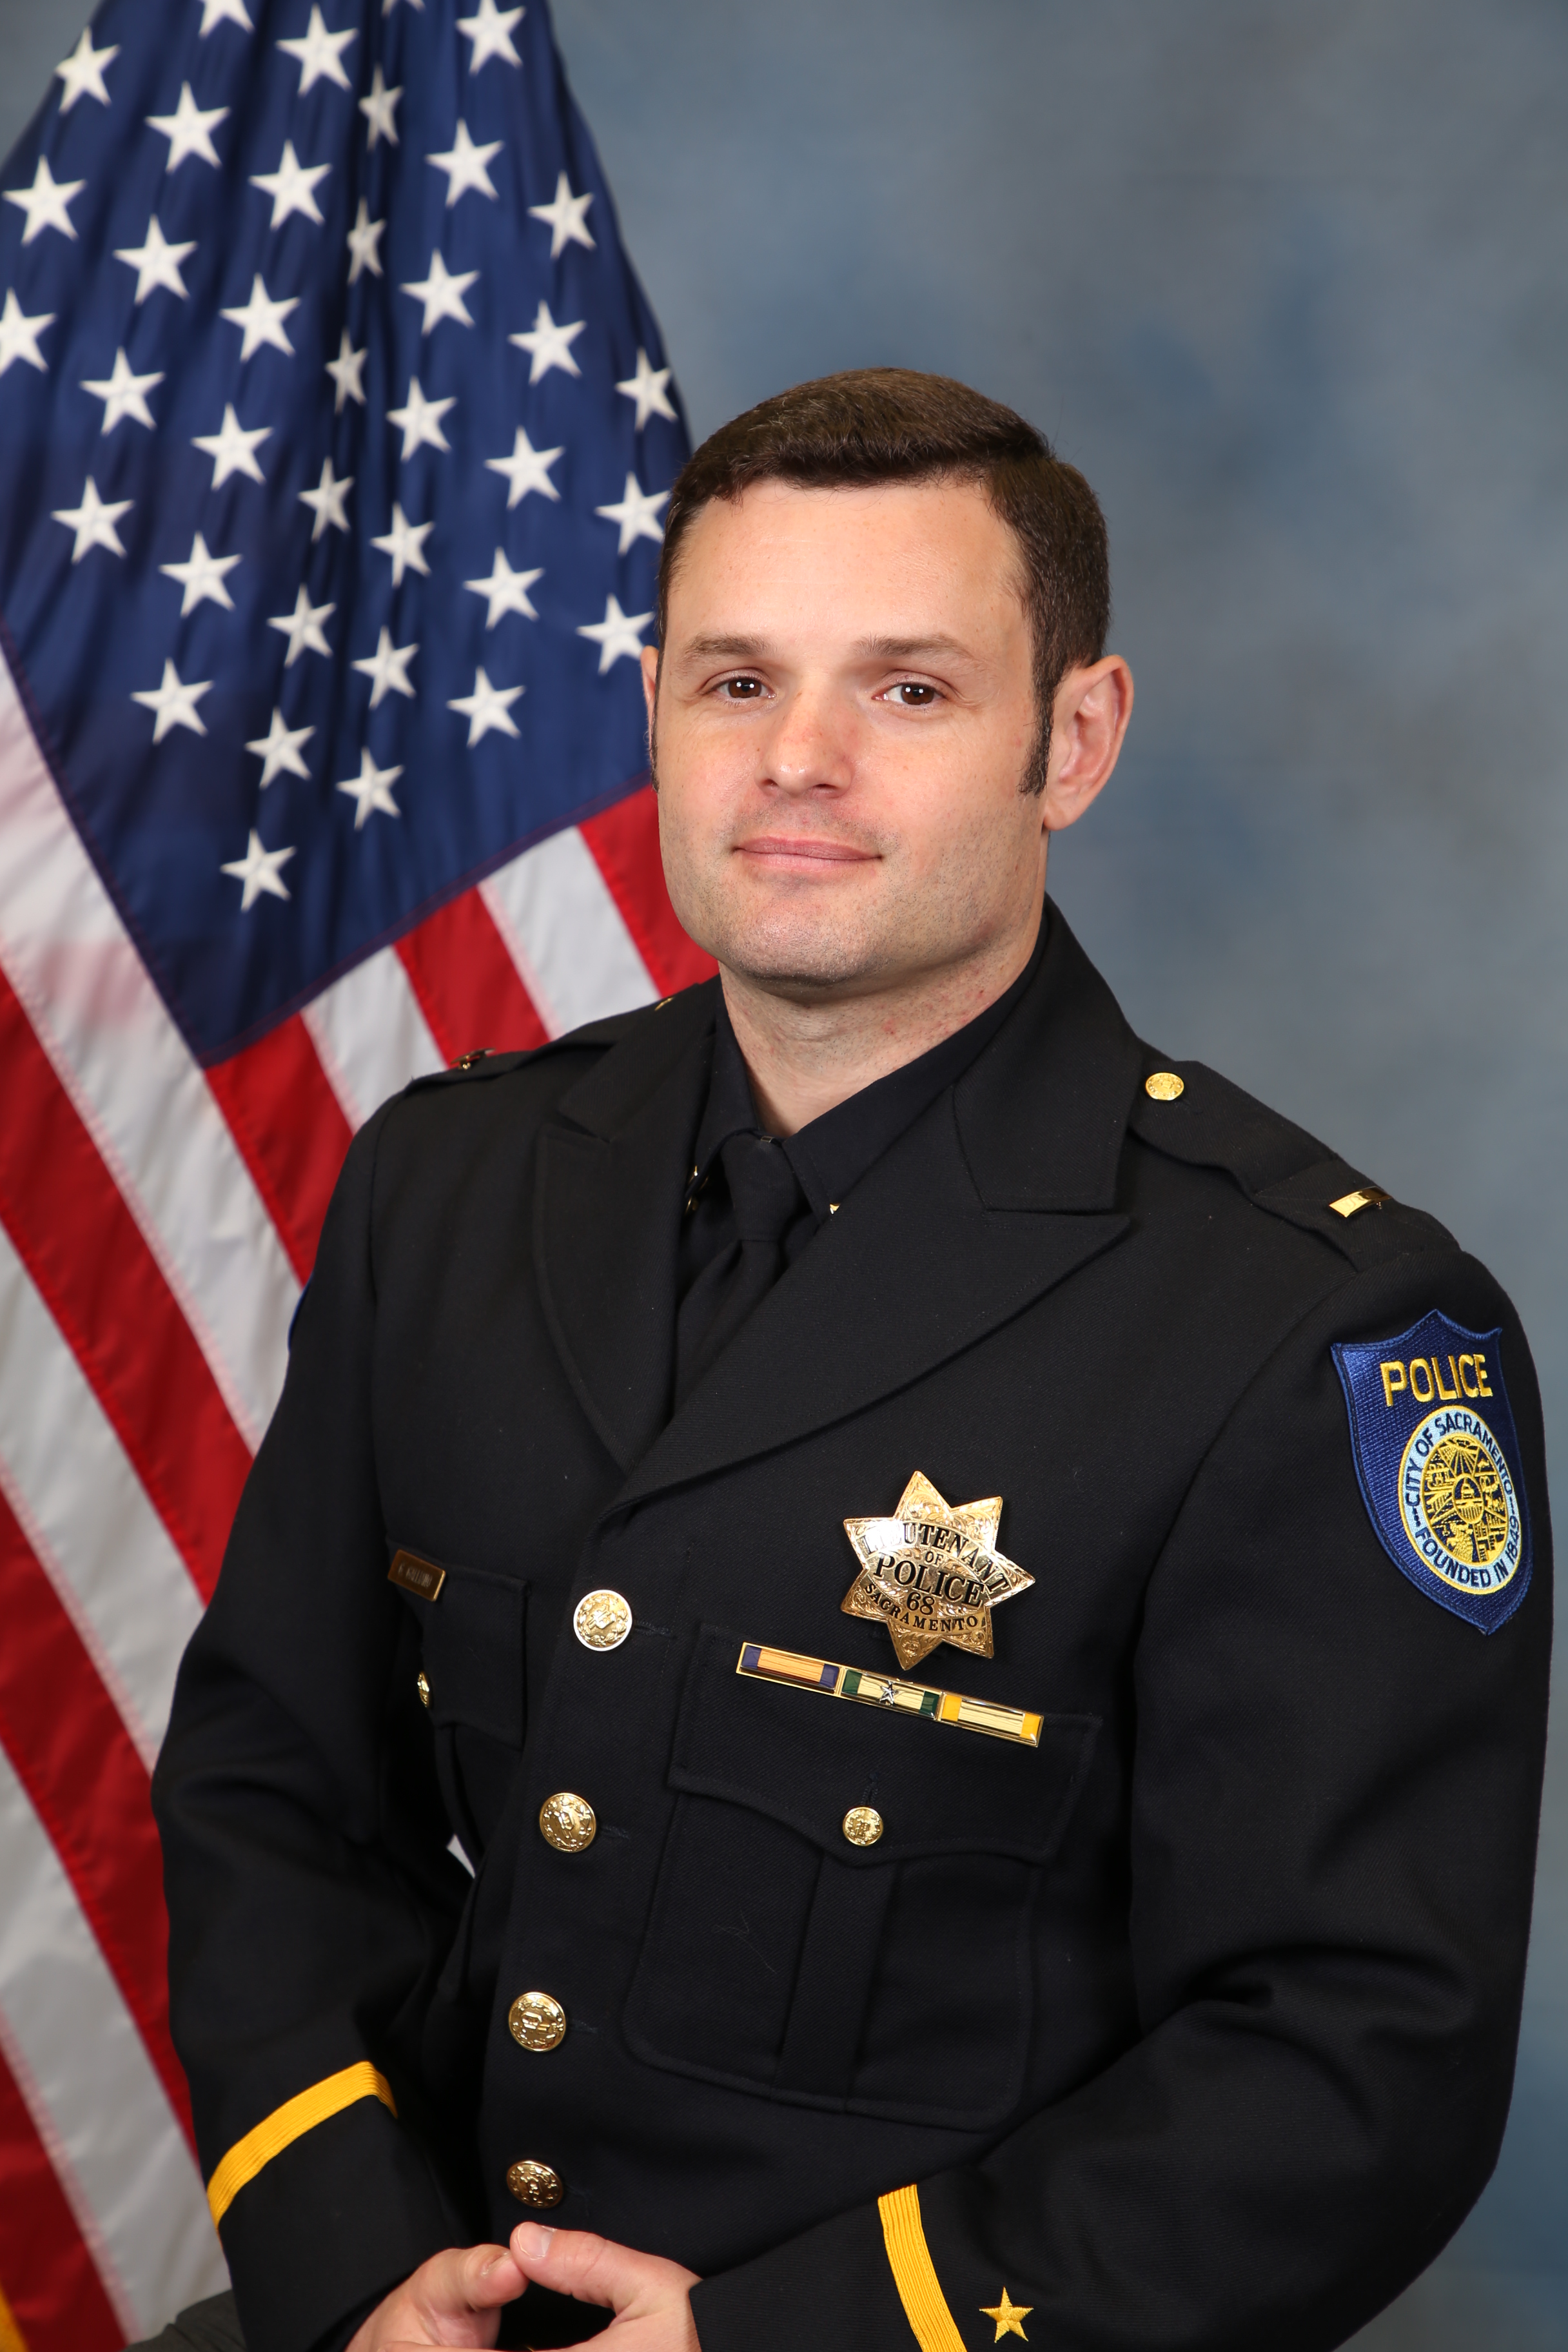 Photo of Greg Galliano in uniform standing in front of the American flag.